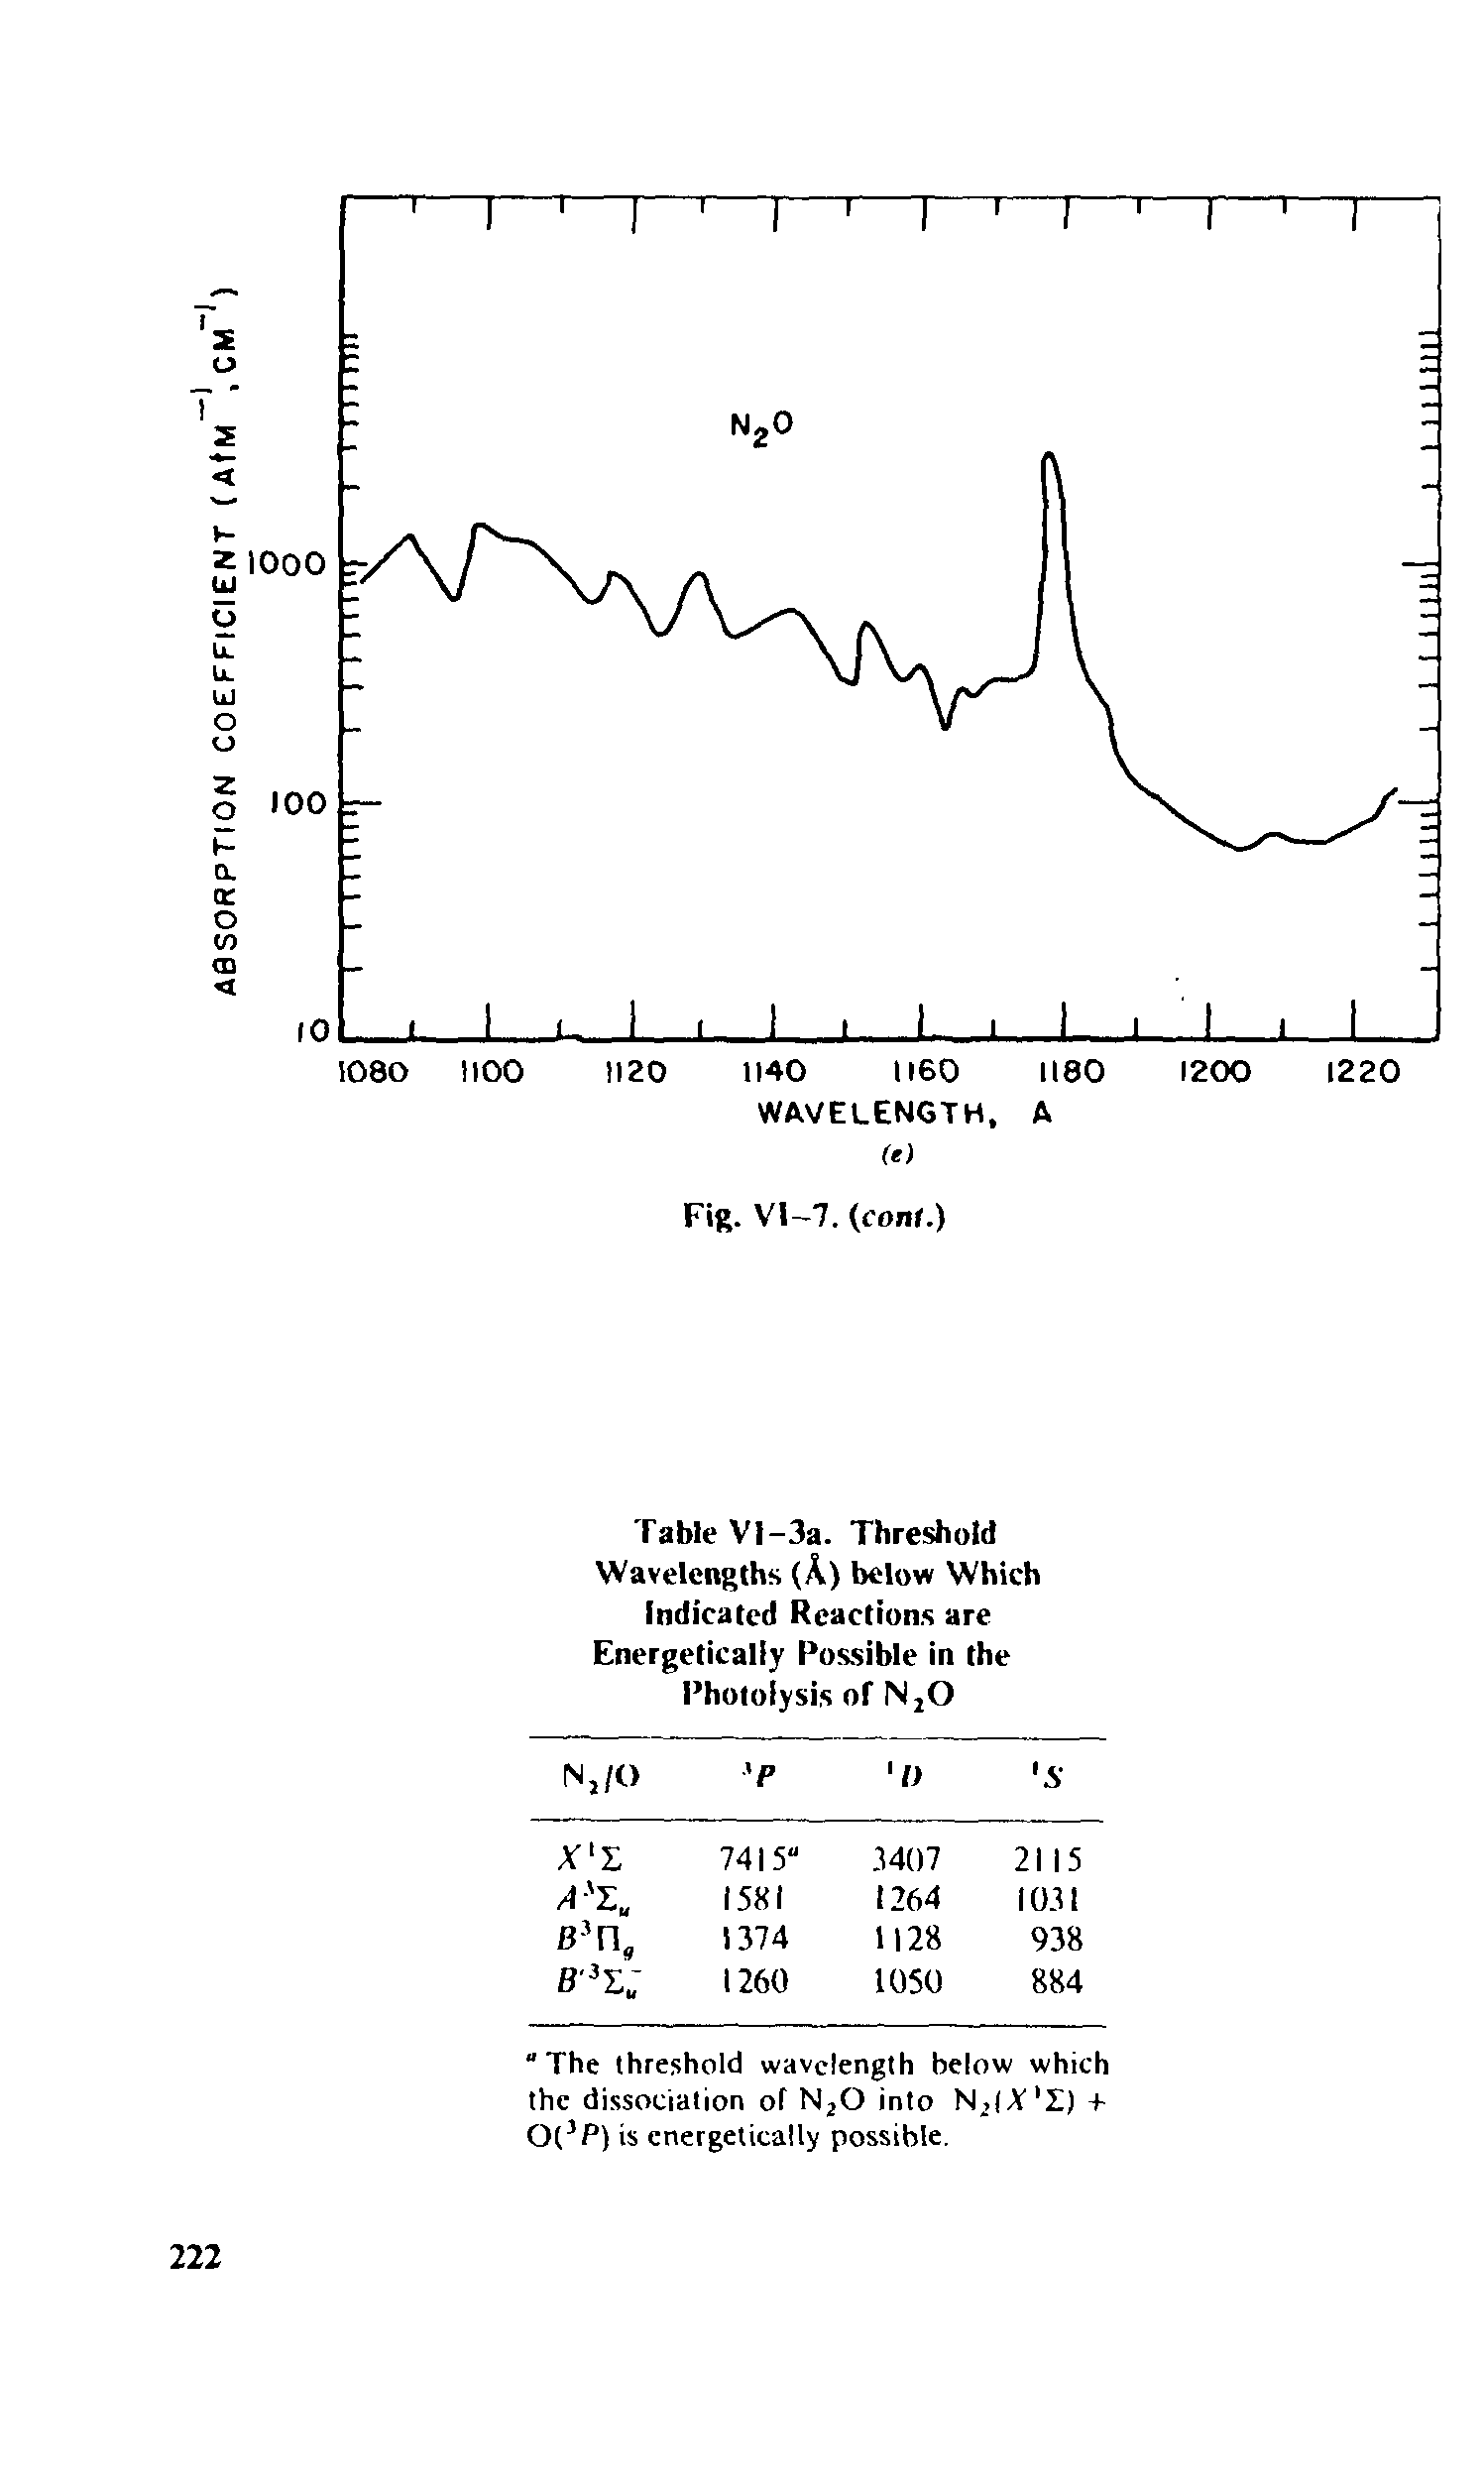 Table Vl-3a. Threshold Wavelengths (A) below Which Indicated Reactions are Energetically Possible in the Photolysis of N20...